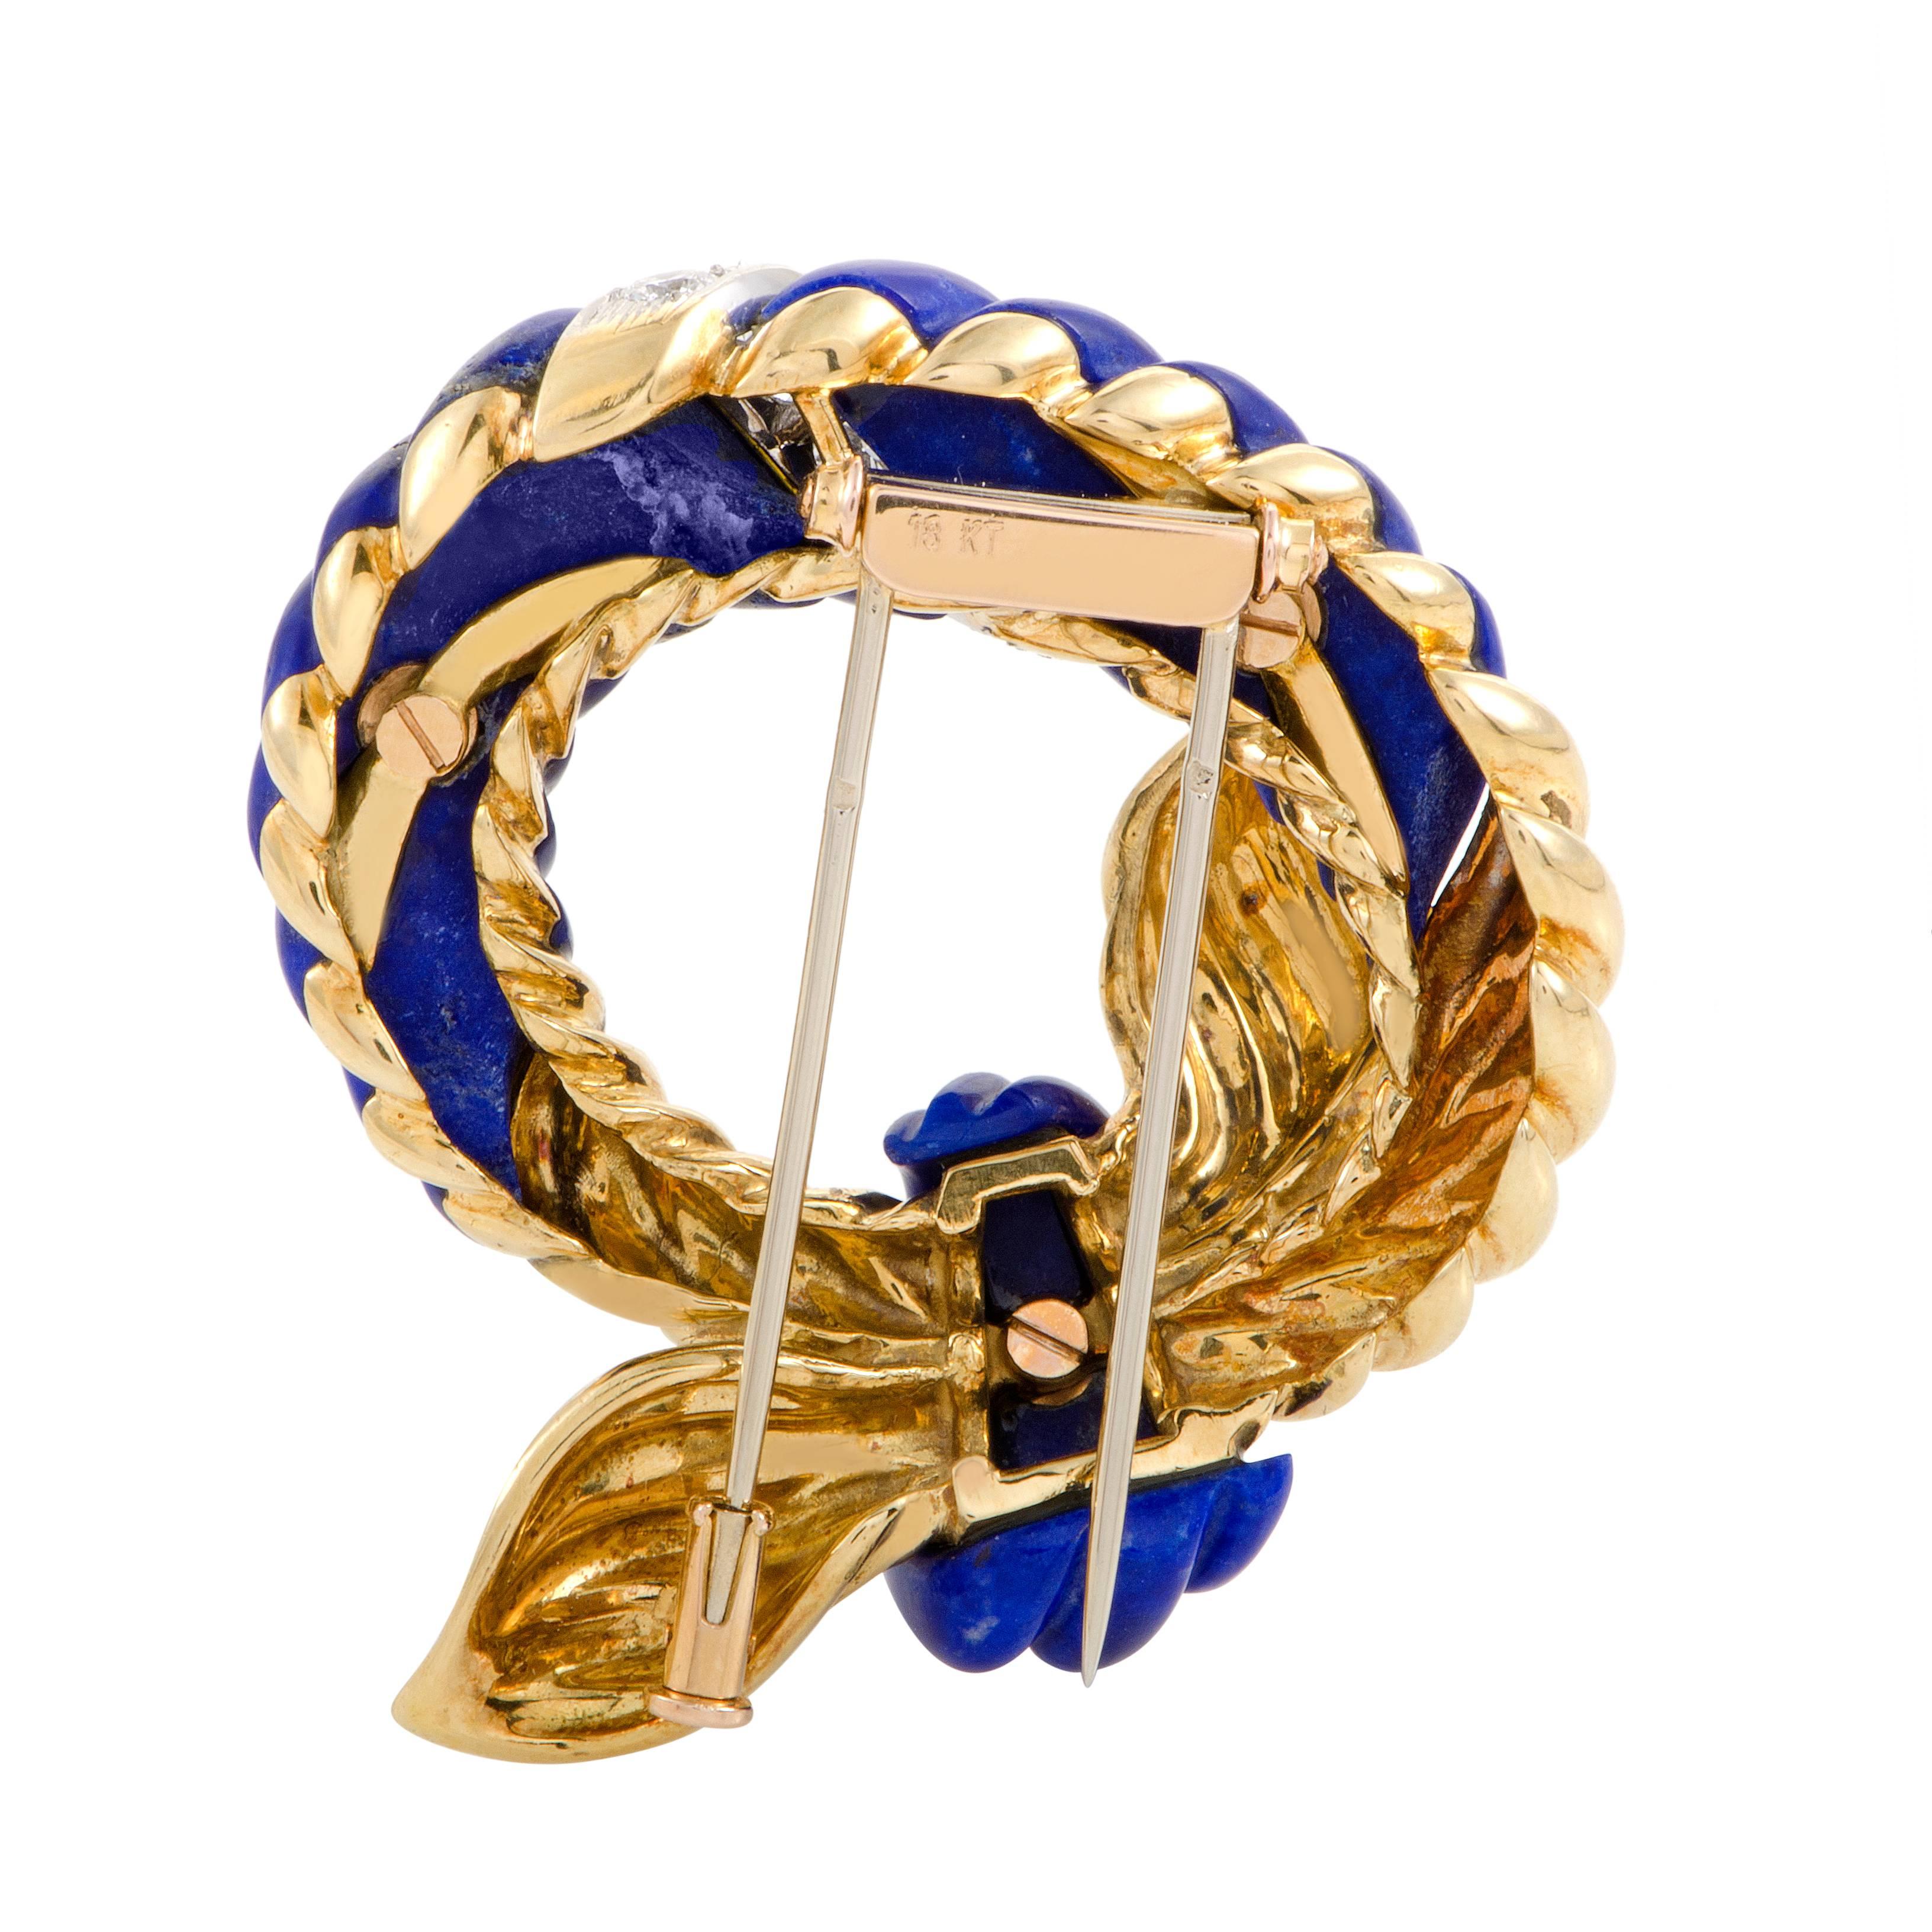 Perfectly in keeping with the alluring shape of the marvelous lapis lazuli, the enchanting 18K yellow gold provides exceptional visual balance in this magnificent brooch from Ilias Lalaounis which also boasts 18K white gold set with 0.45ct of